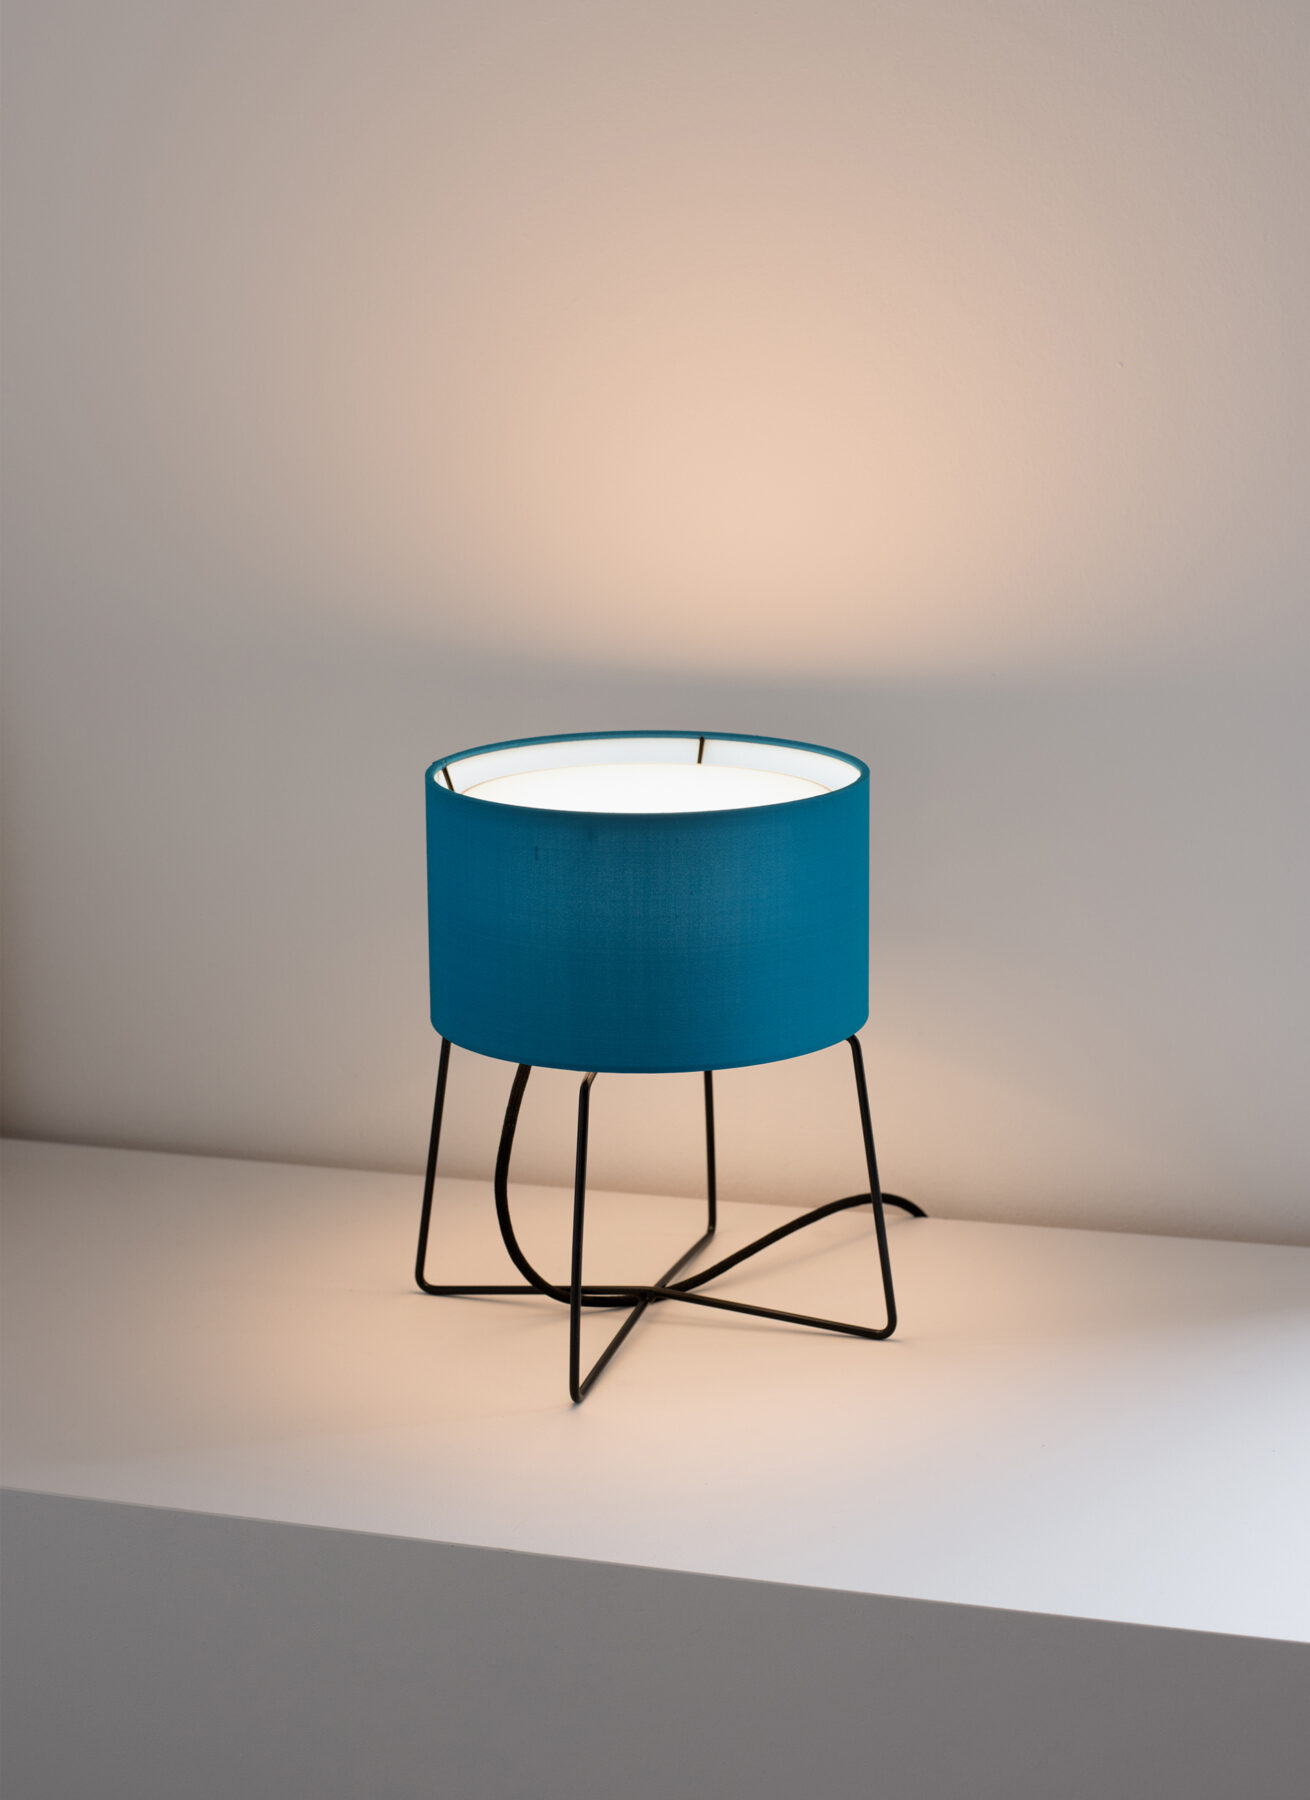 The Orbiter table lamp from filumen with turquoise fabric shade and black base.